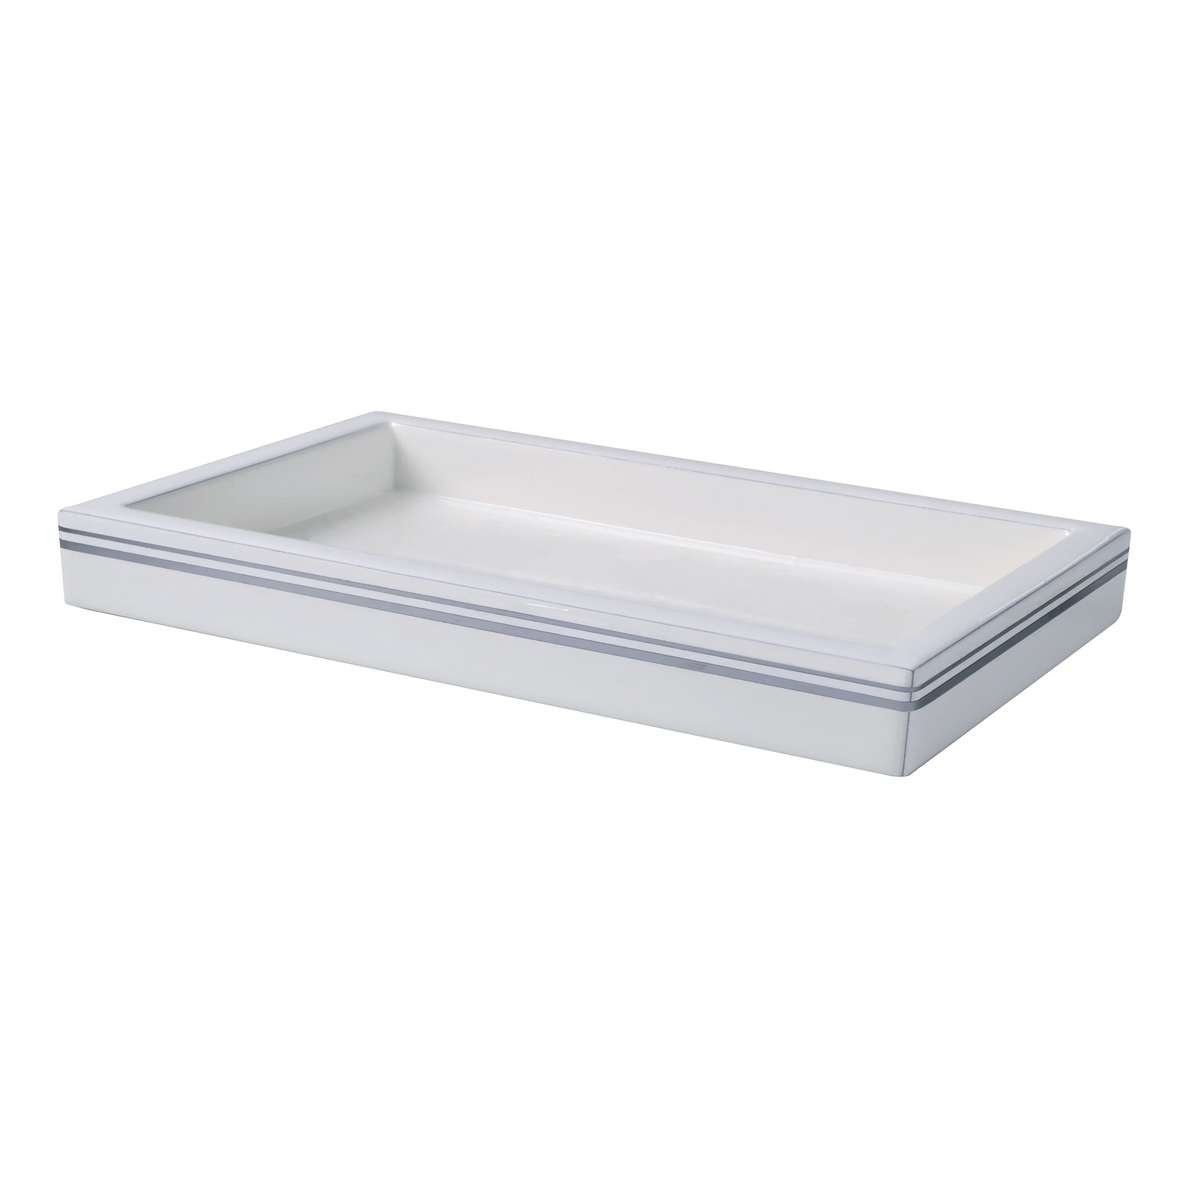 Mike and Ally Resort Bath Accessories Pure Silver Rectangle Tray